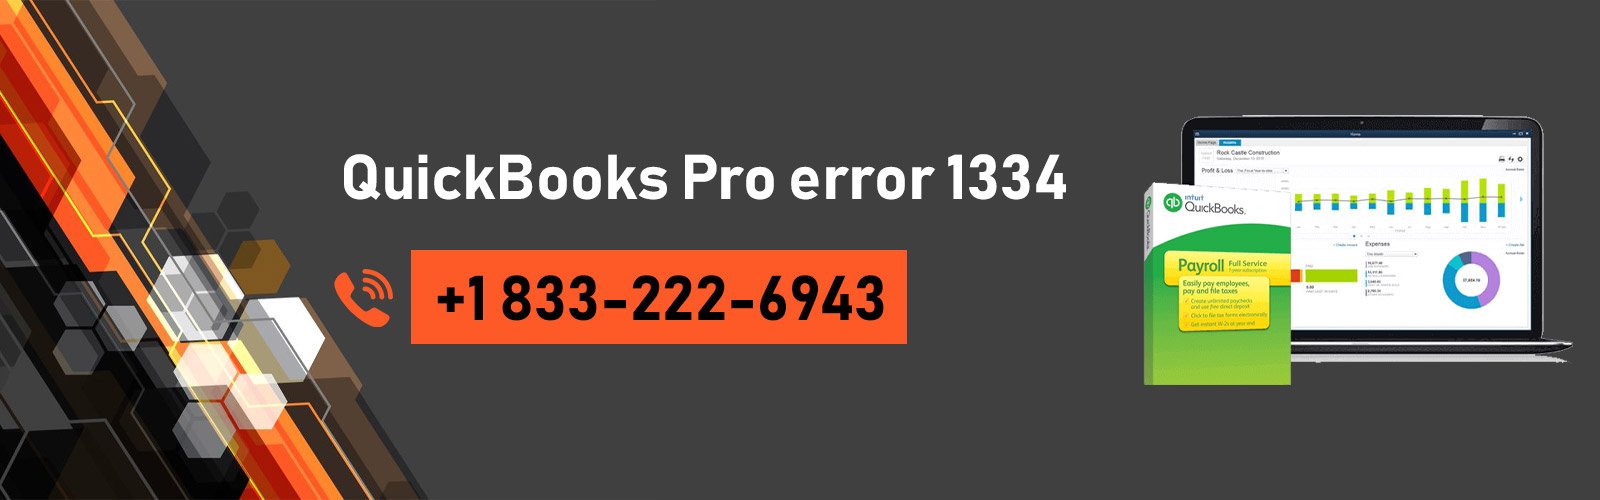 QuickBooks Pro error 1334: Get the error fixed instantly by our experts at +1 833-222-6943